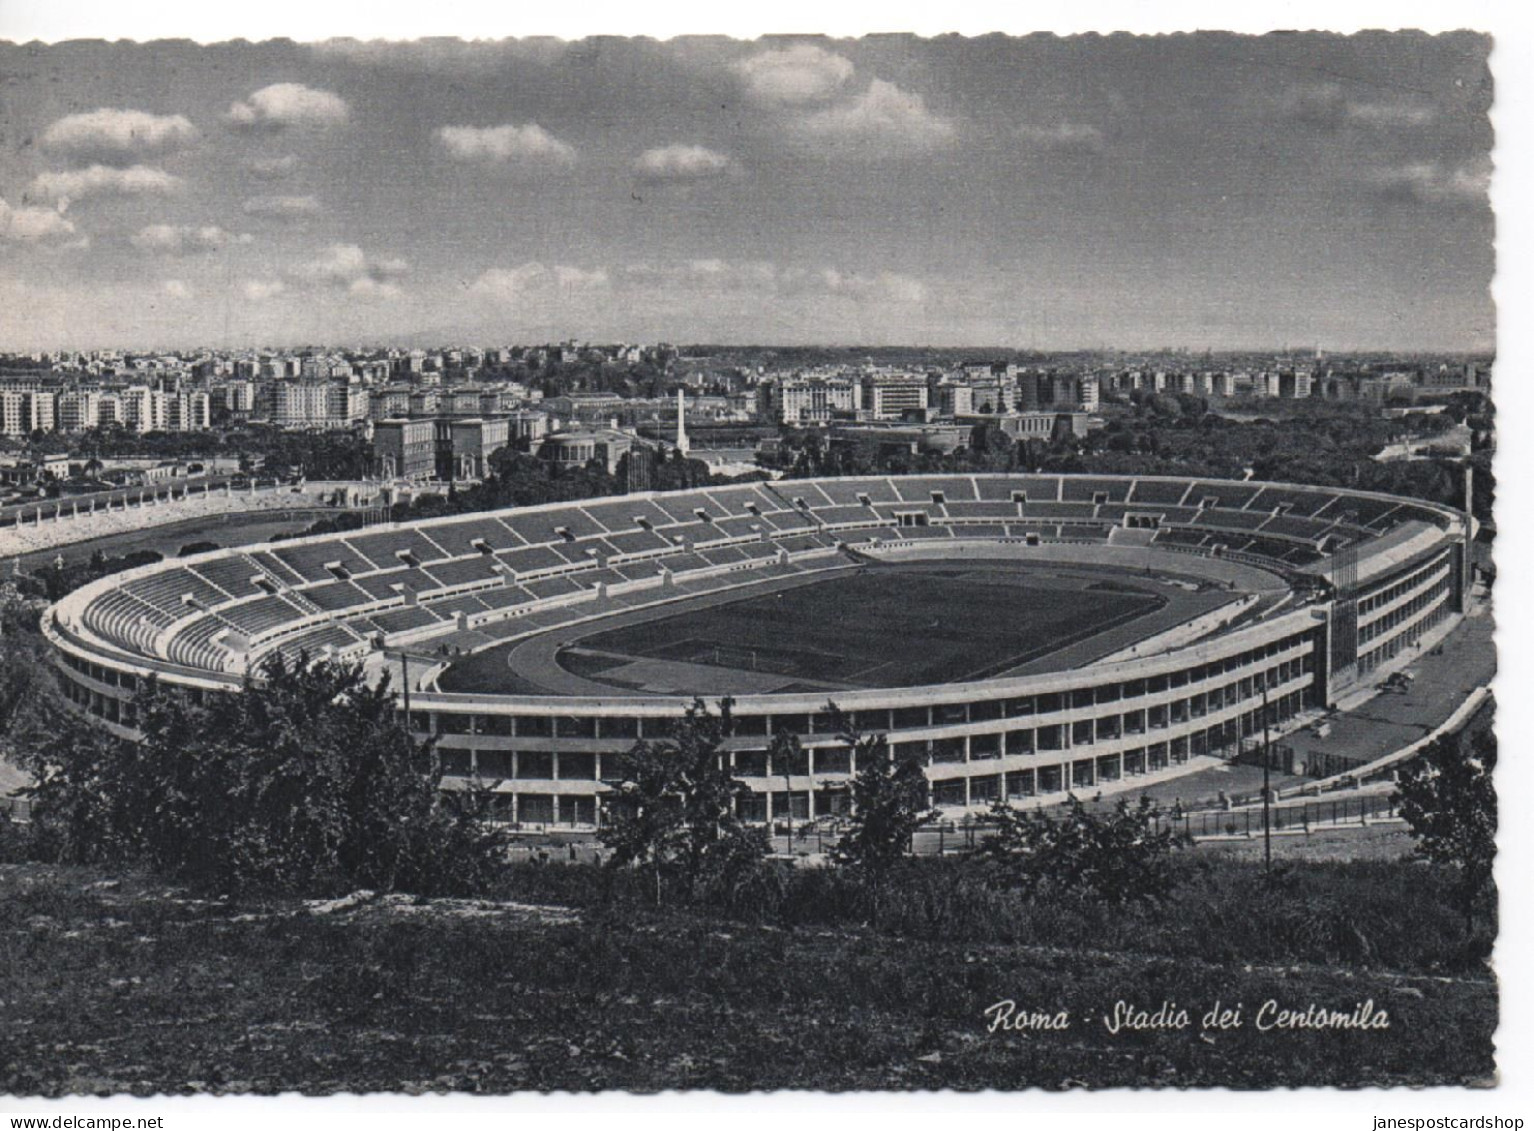 THE STADIUM OF HUNDRED THOUSAND SPECTATORS - LARGER SIZED POSTCARD - UNPOSTED - IN GOOD CONDITION - 1950's ? - Stadien & Sportanlagen